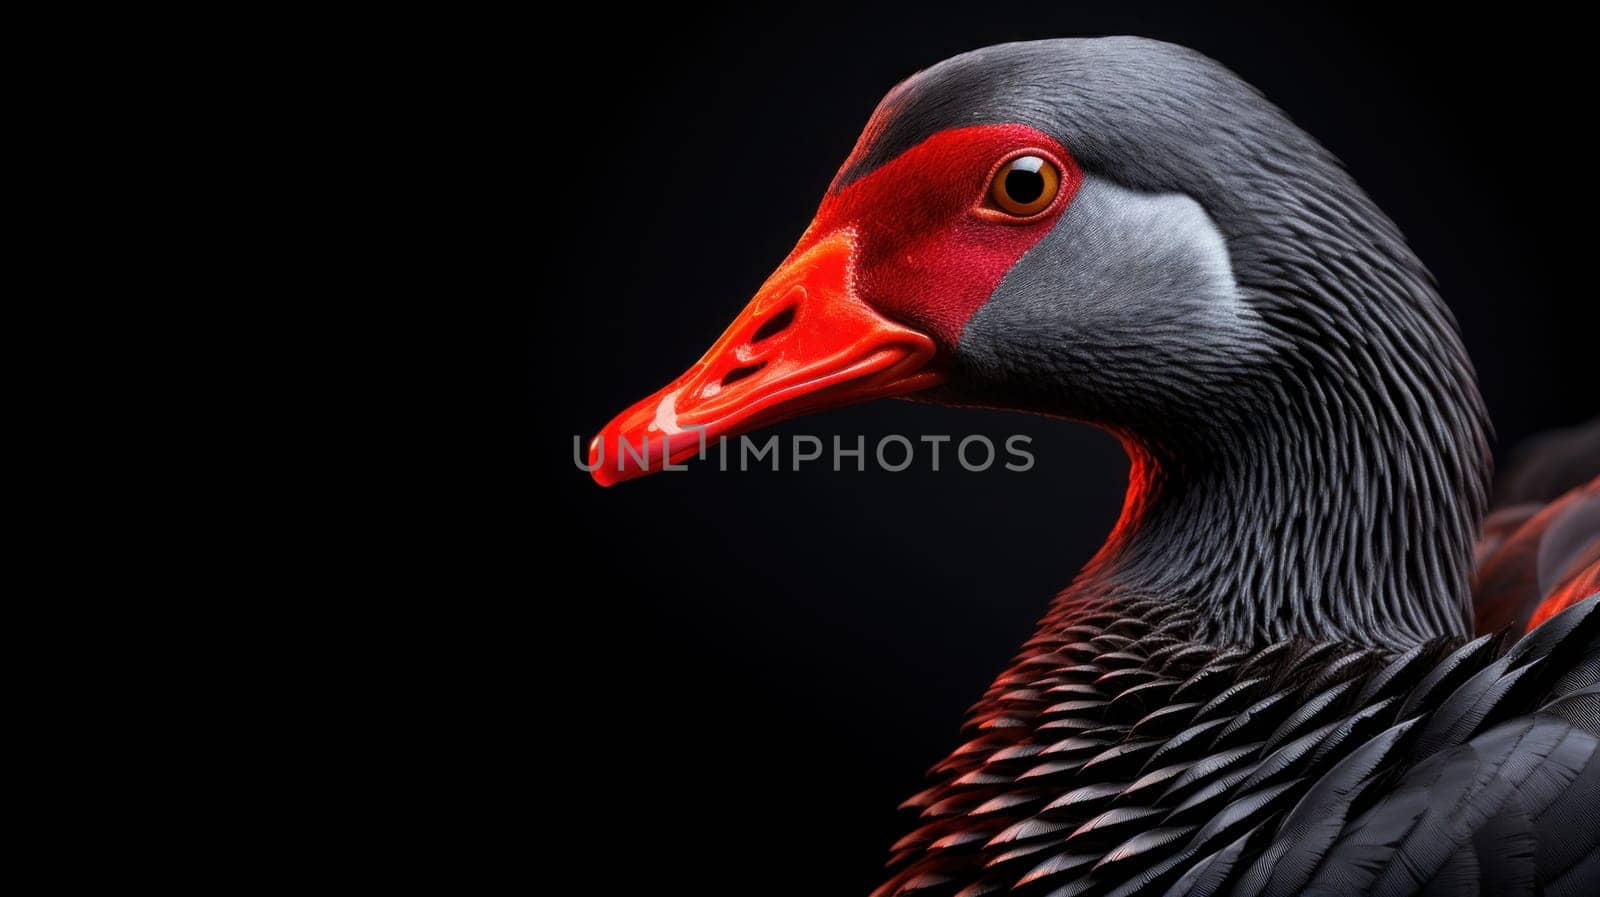 A close up of a bird with red eyes and orange beak, AI by starush